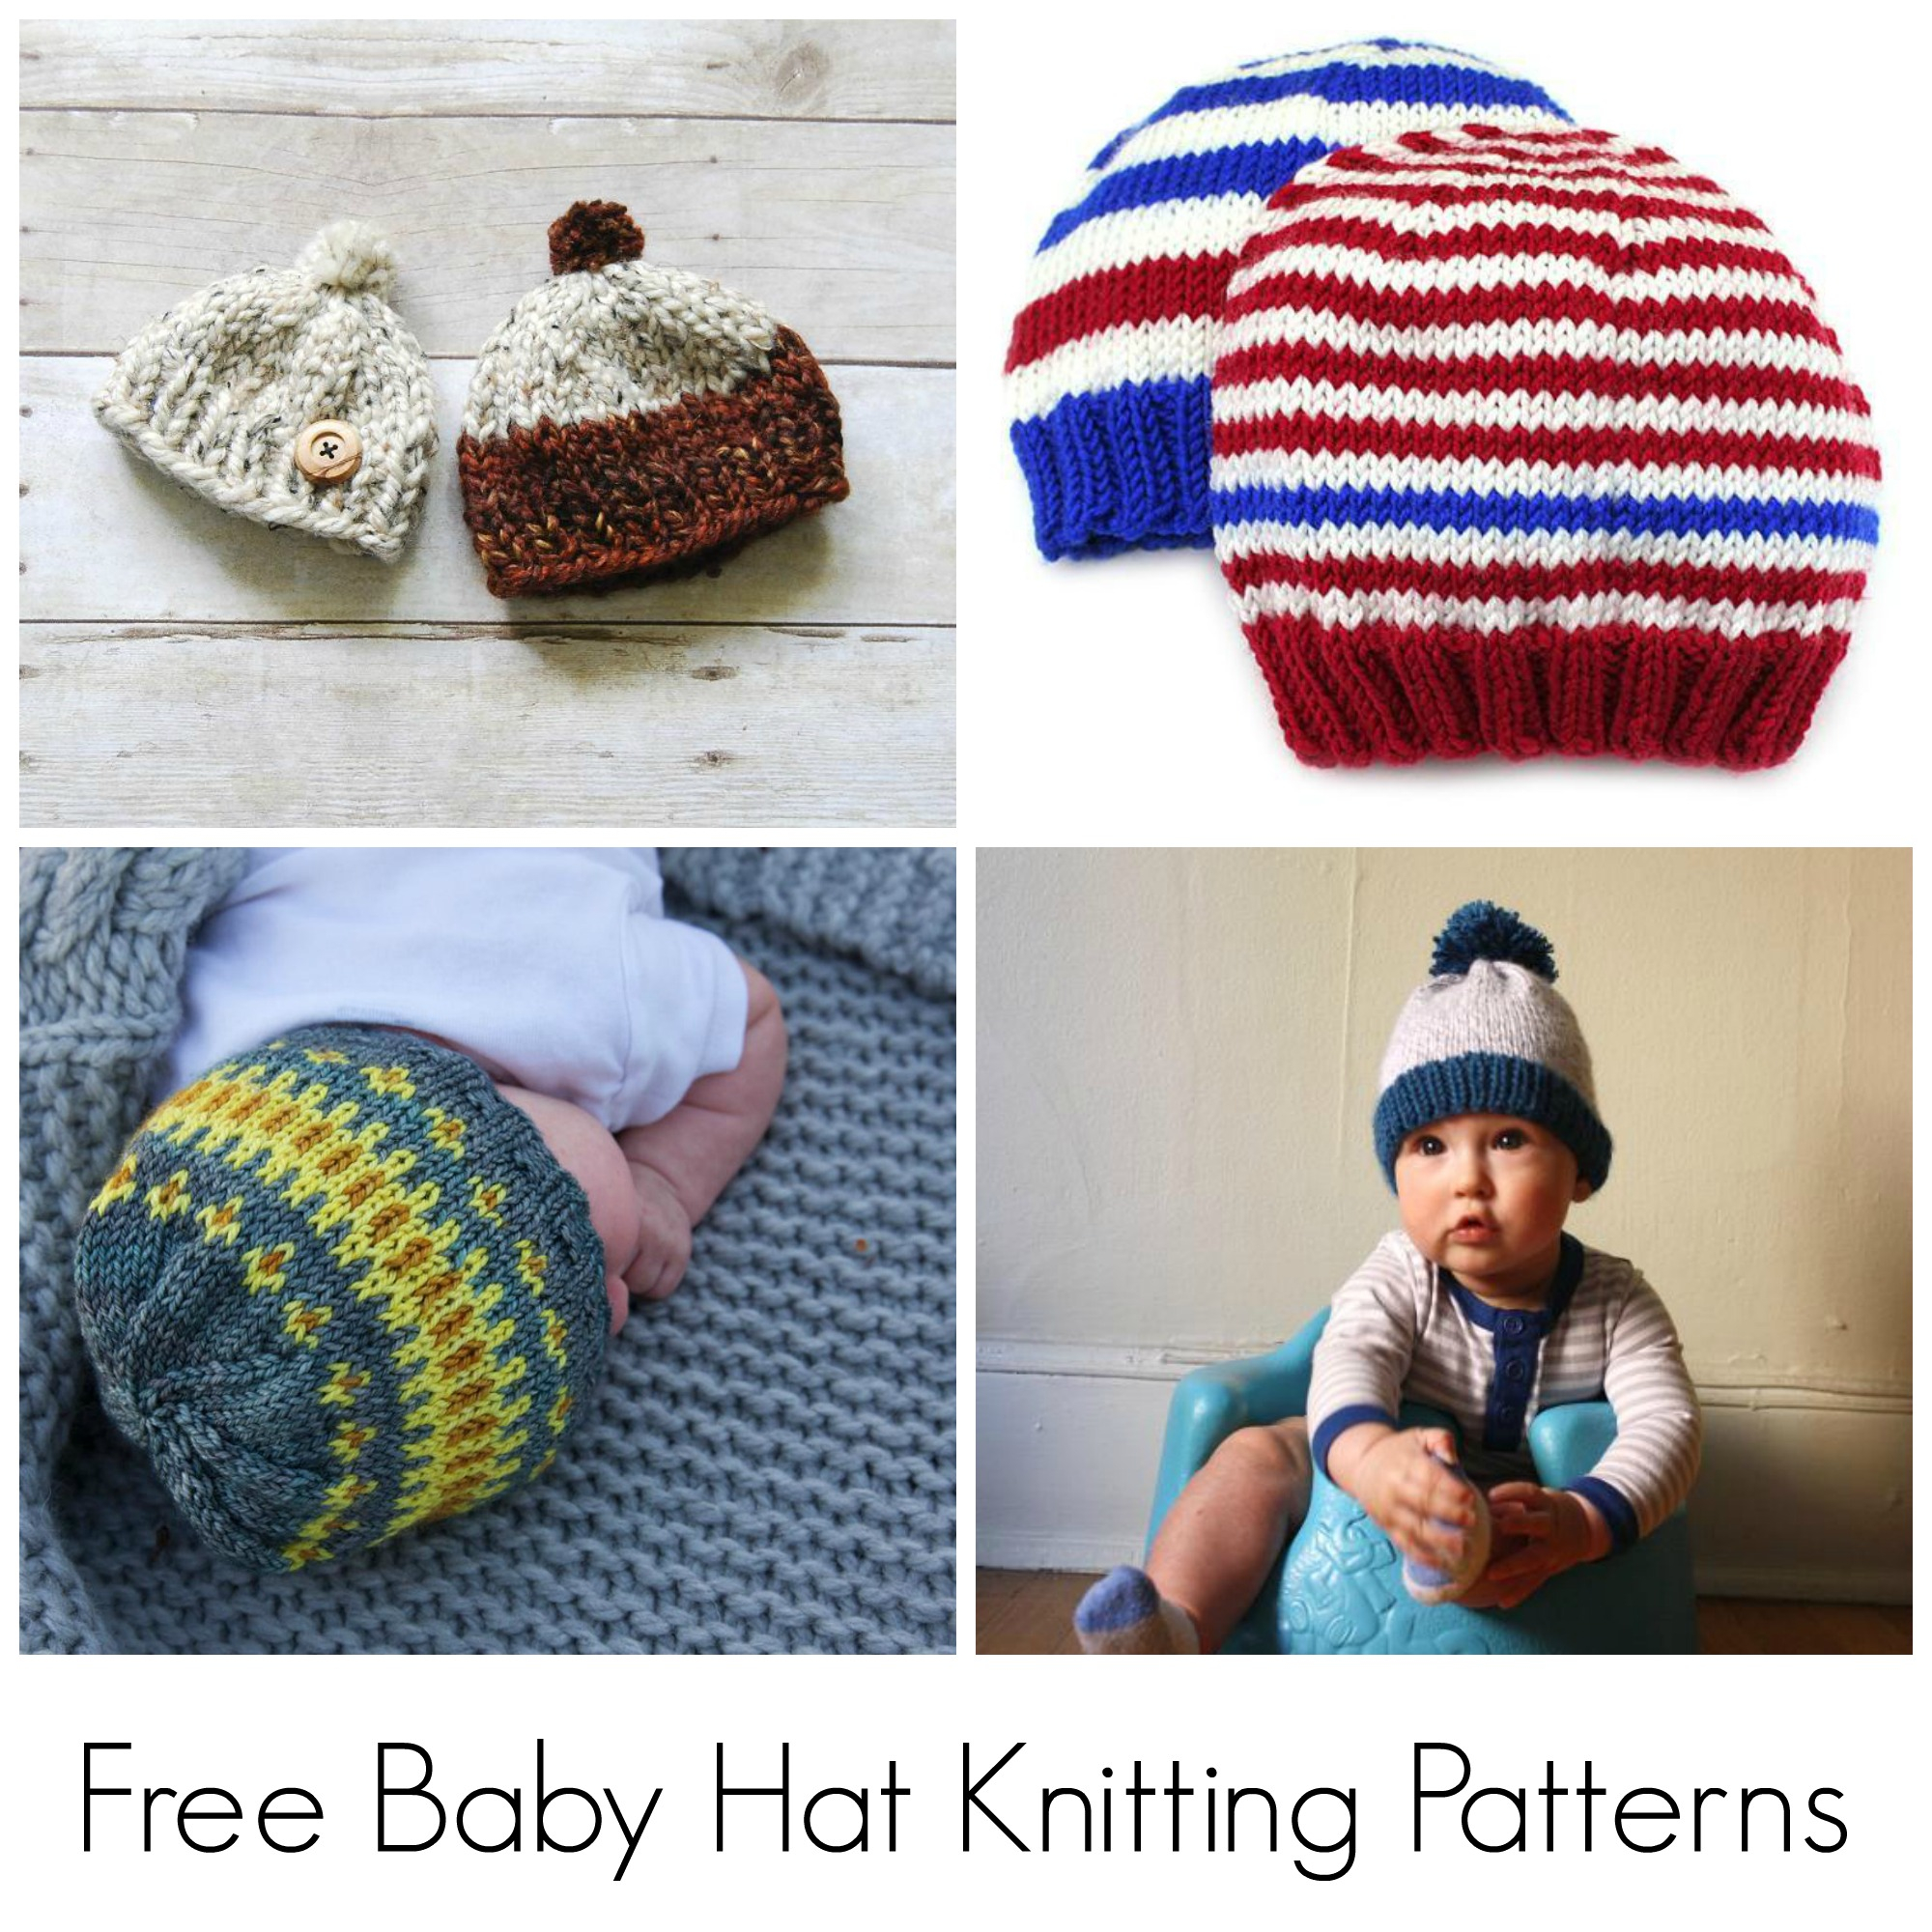 Ladies Knitted Hat Patterns 10 Free Knitting Patterns For Ba Hats On Craftsy